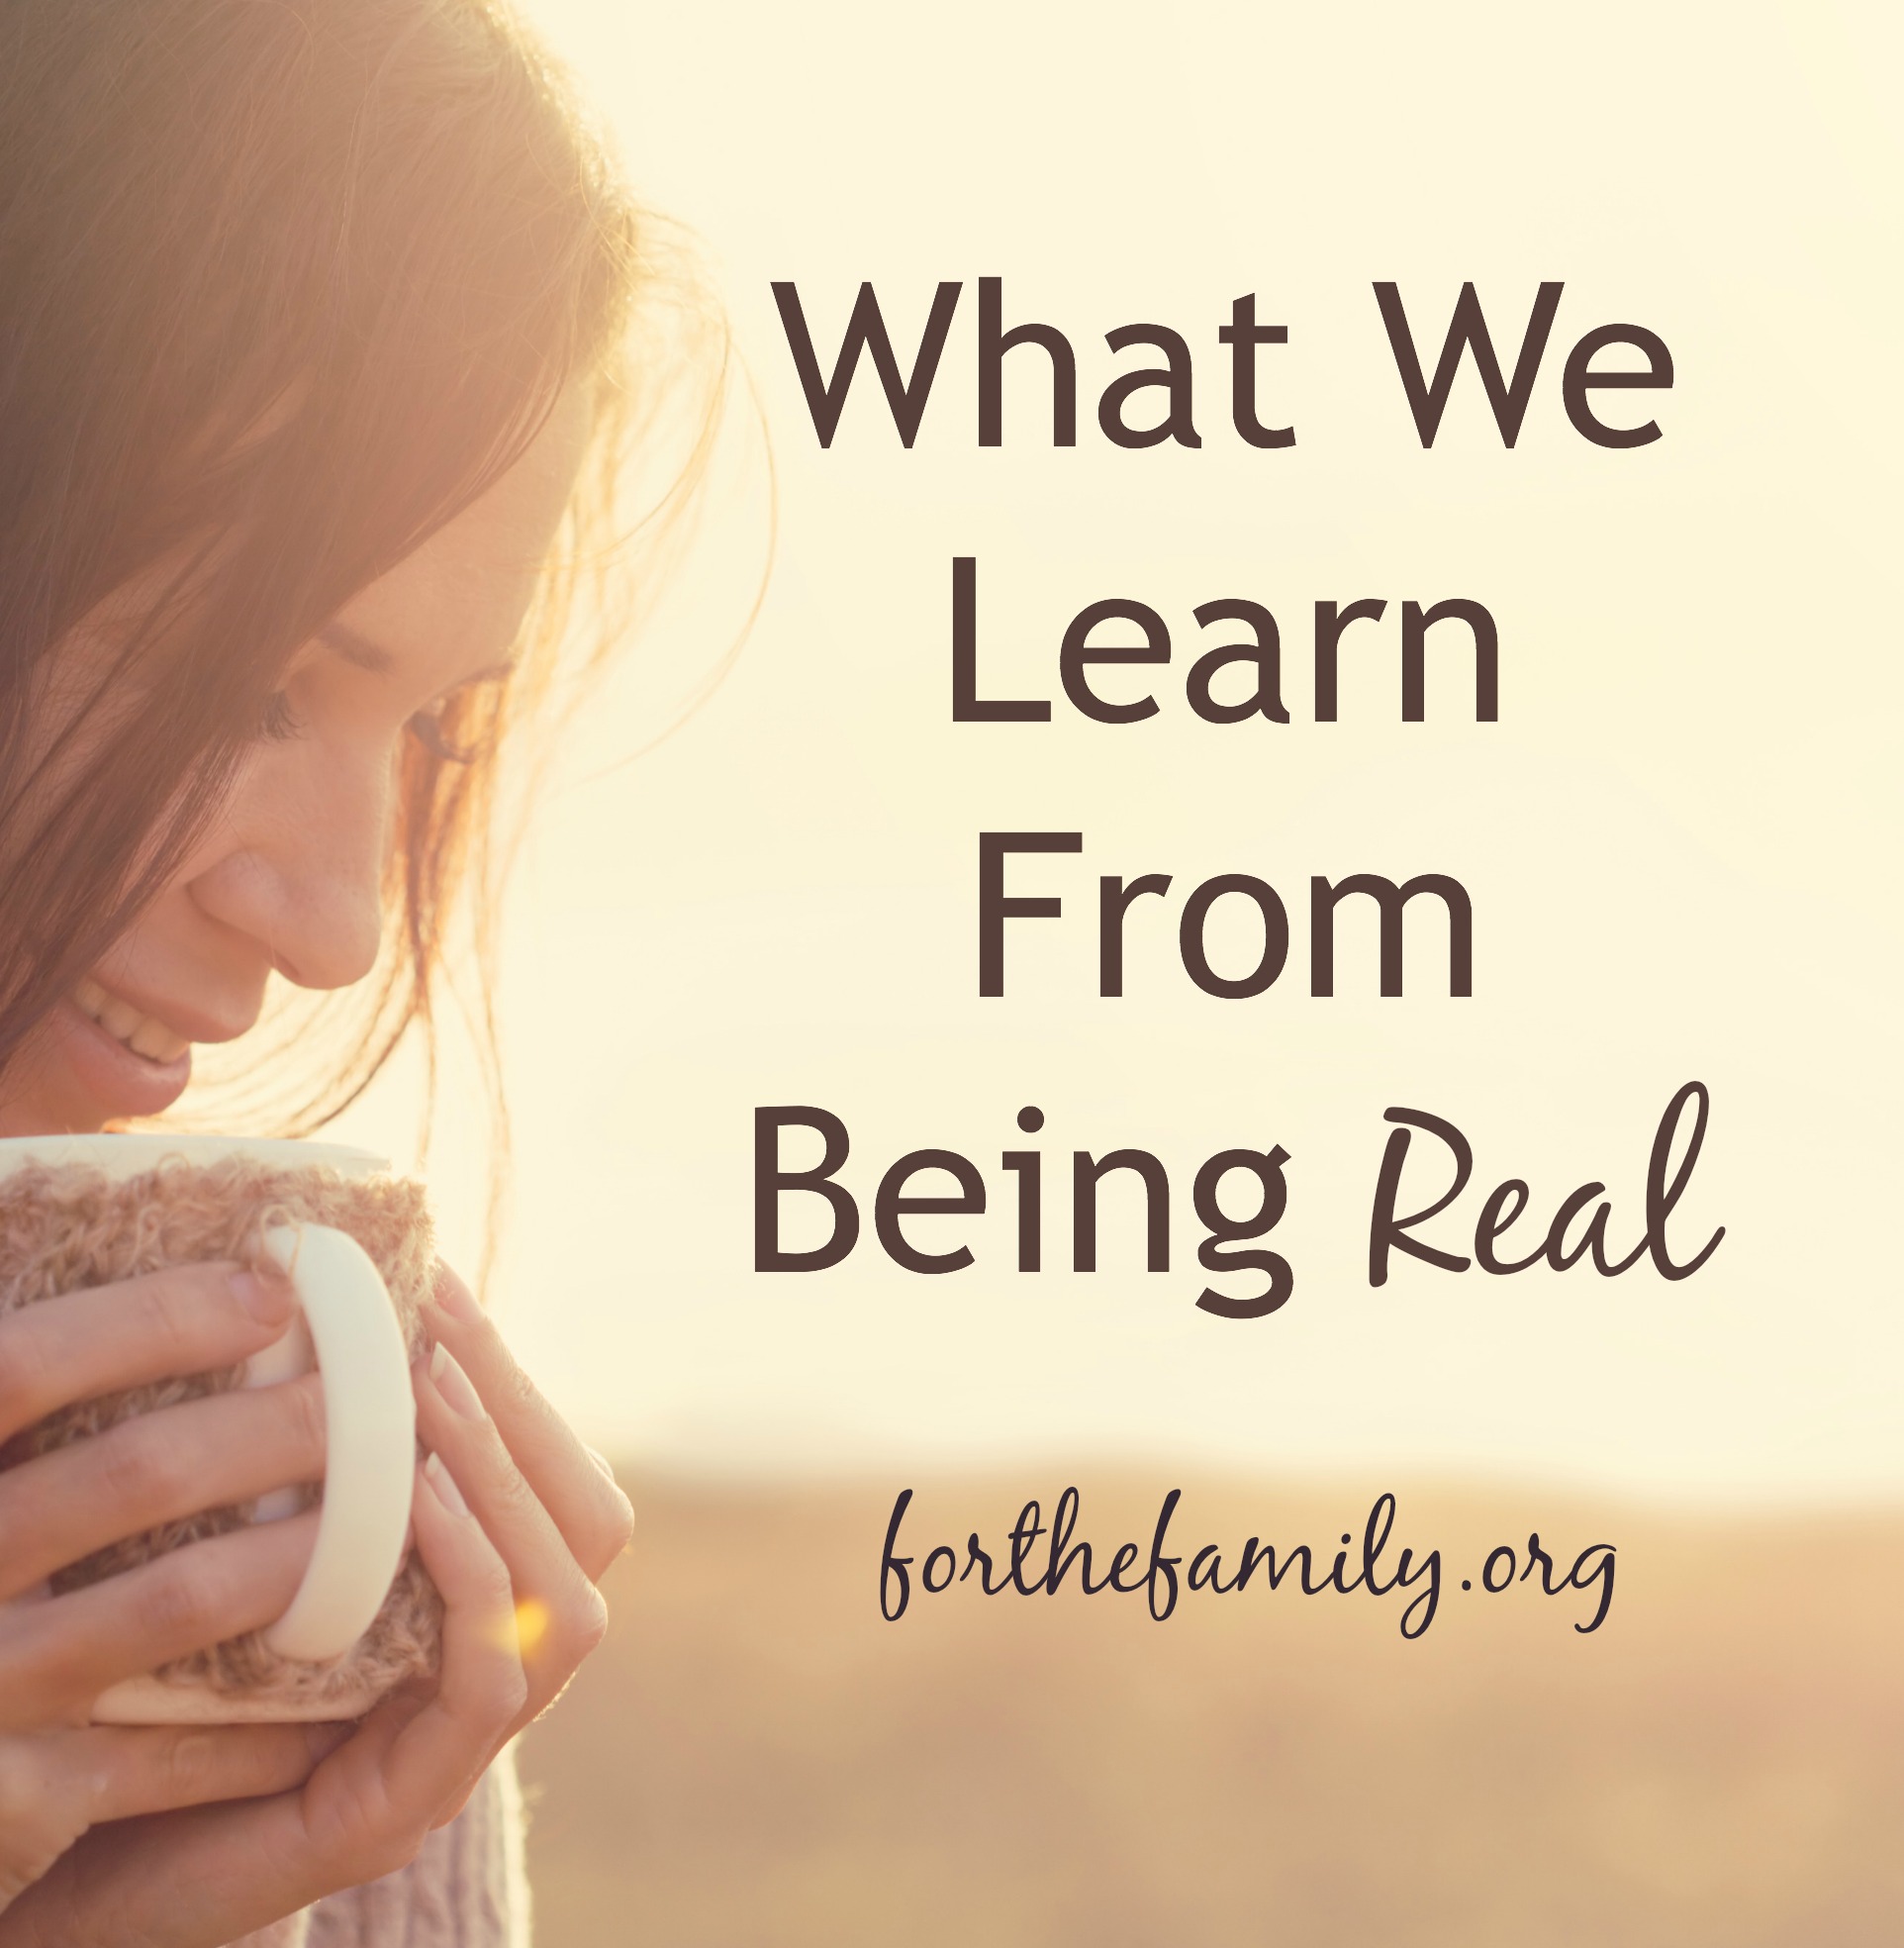 What We Learn From Being Real